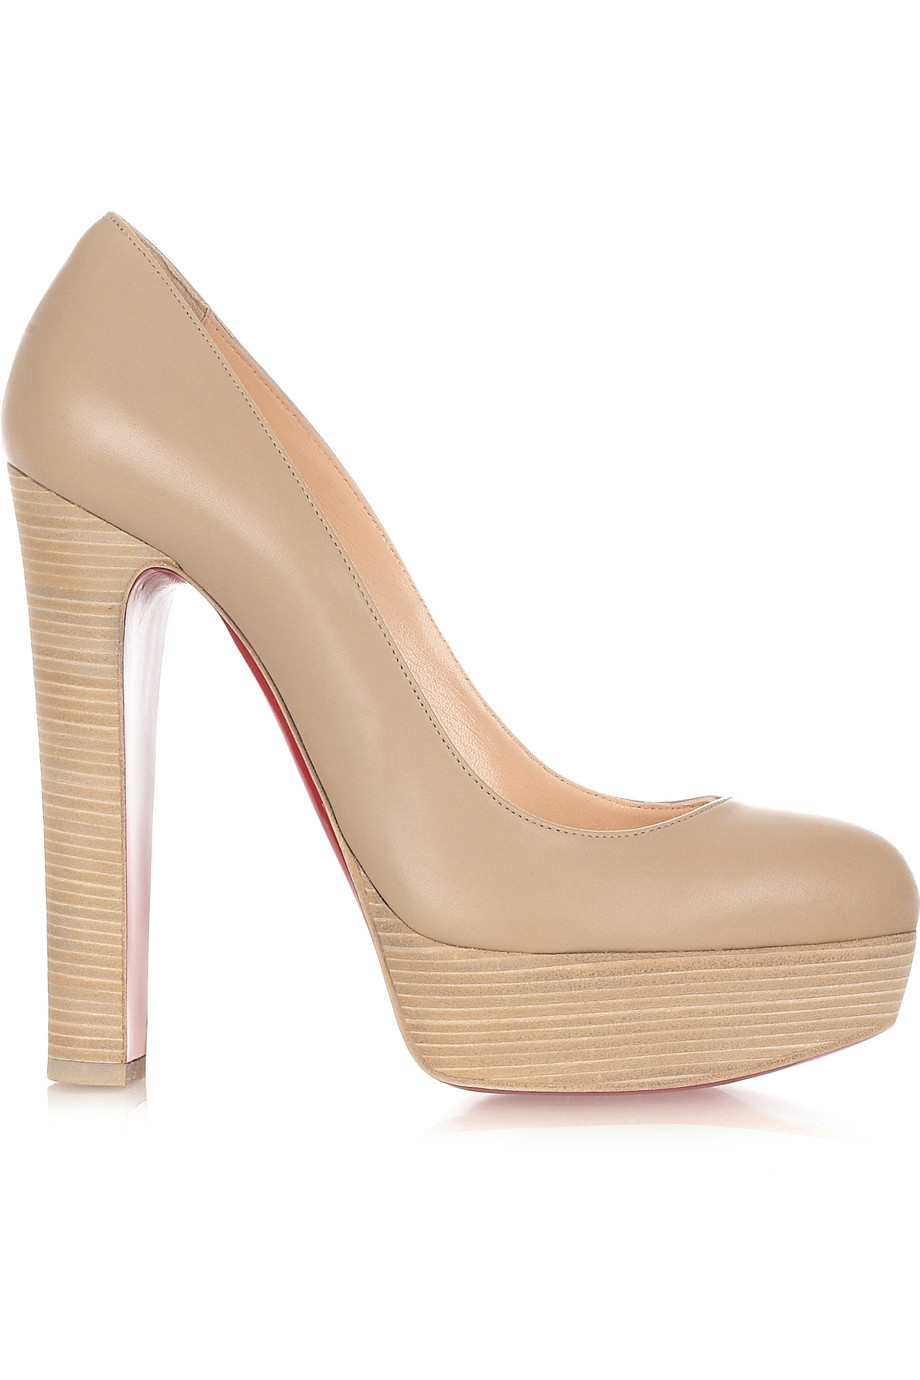 Christian Louboutin Bibi 140 Leather Pumps in Natural | Lyst